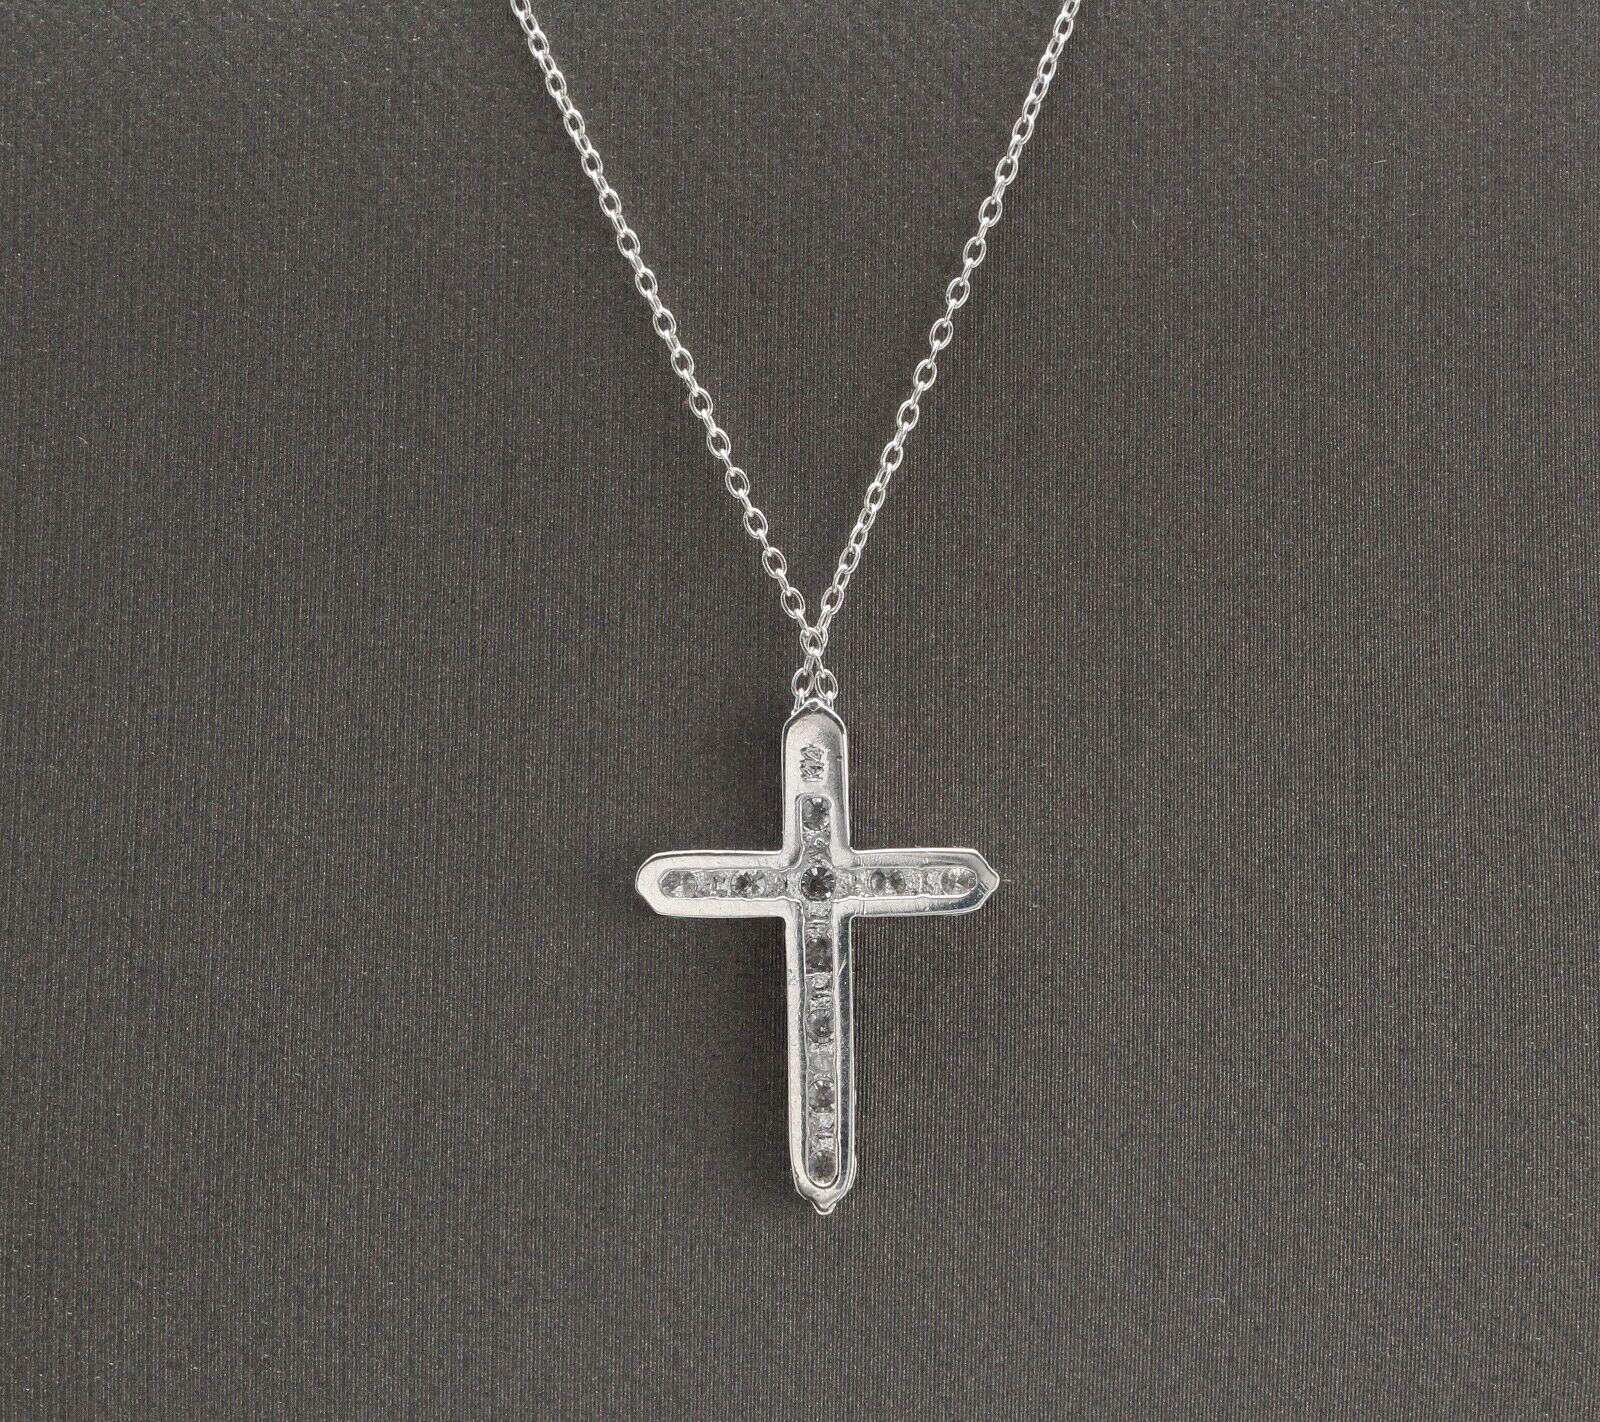 1.10Ct Stunning 14K Solid White Gold Diamond Cross Pendant Necklace

Amazing looking piece! 

Stamped: 14k

Total Natural Round Diamond Weight is: Approx. 1.10 Carats (G-H / SI)

Chain Length is: 18 inches (can adjusted to 16